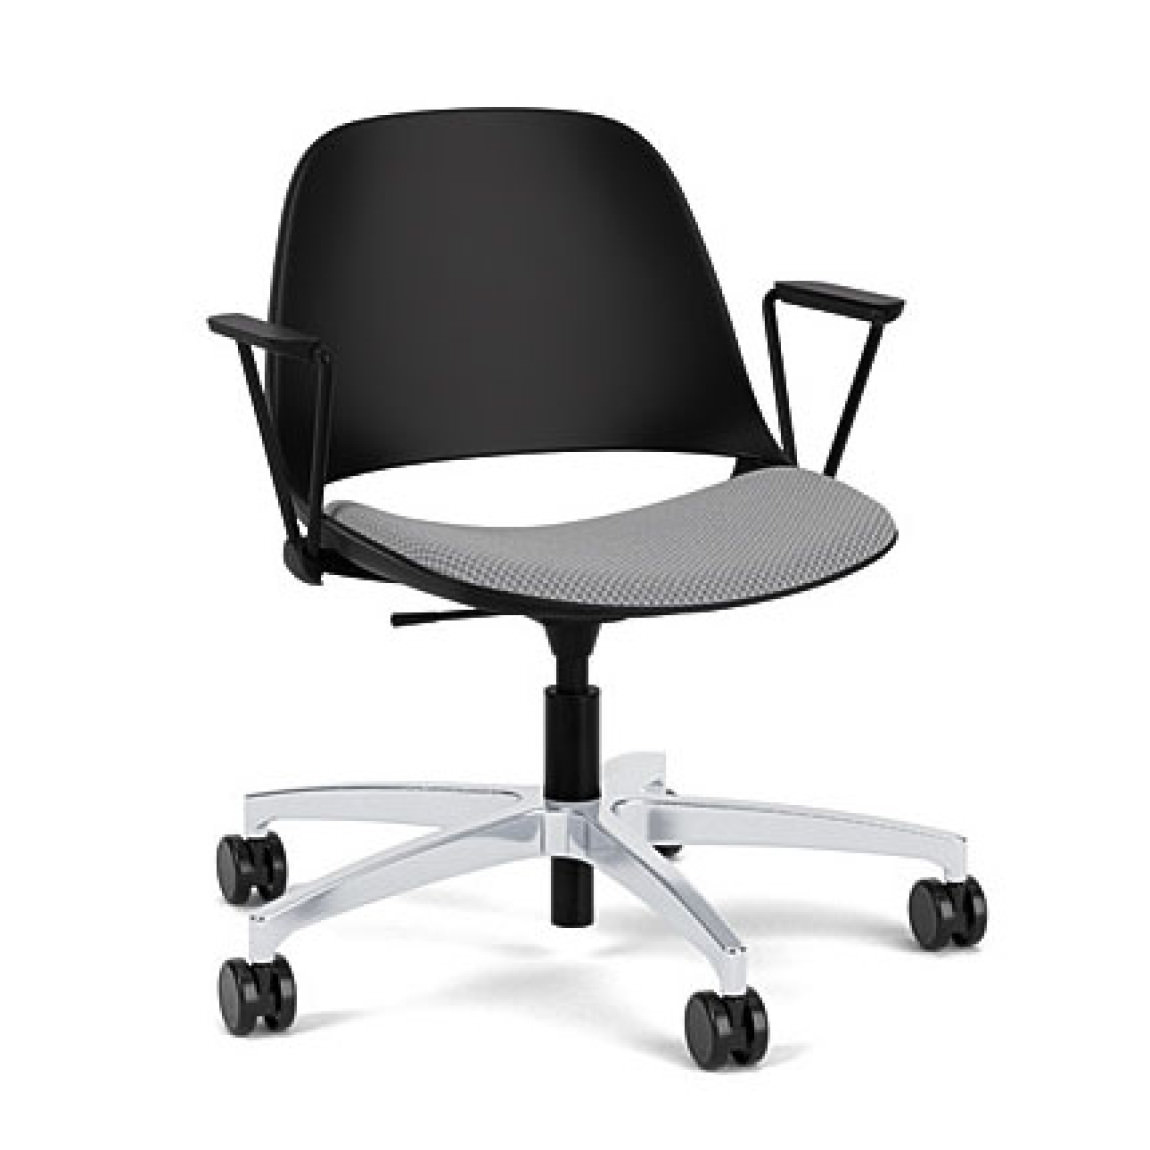 Conference Room Chair with Fabric Seat